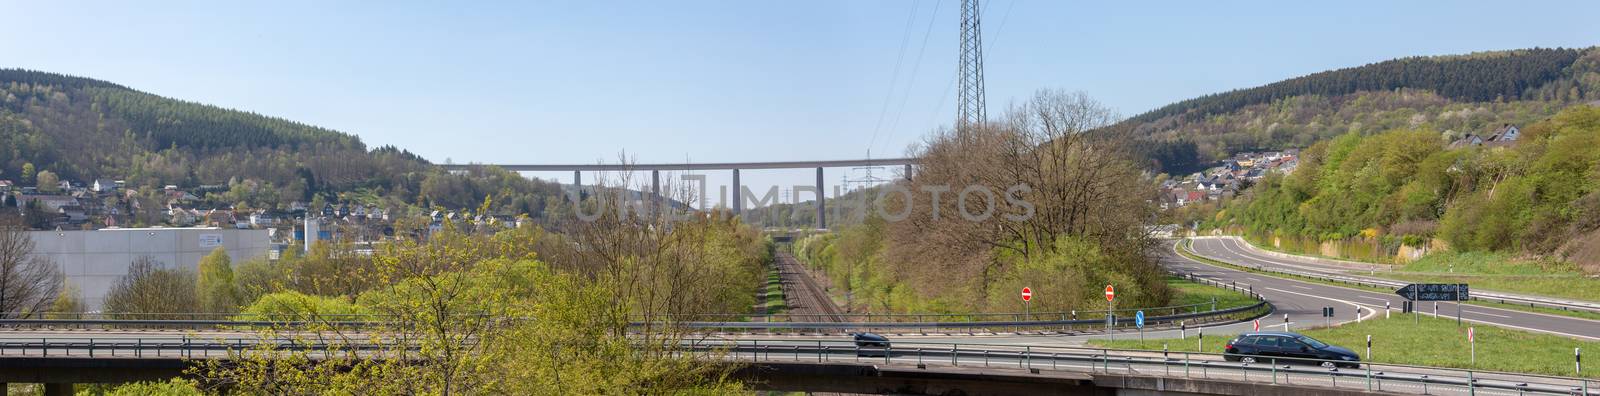 Panorama of the elevated road over a railway line by Dr-Lange